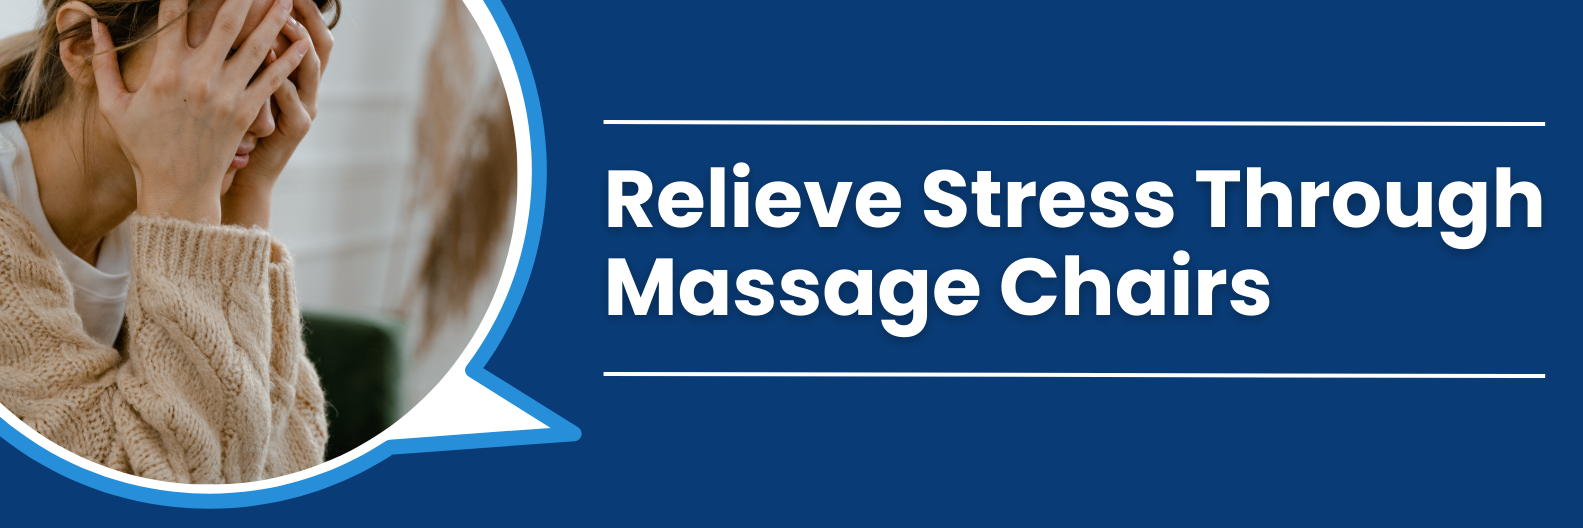 You can relieve stress through massage chairs using various massage techniques to target tense muscles and promote relaxation. 